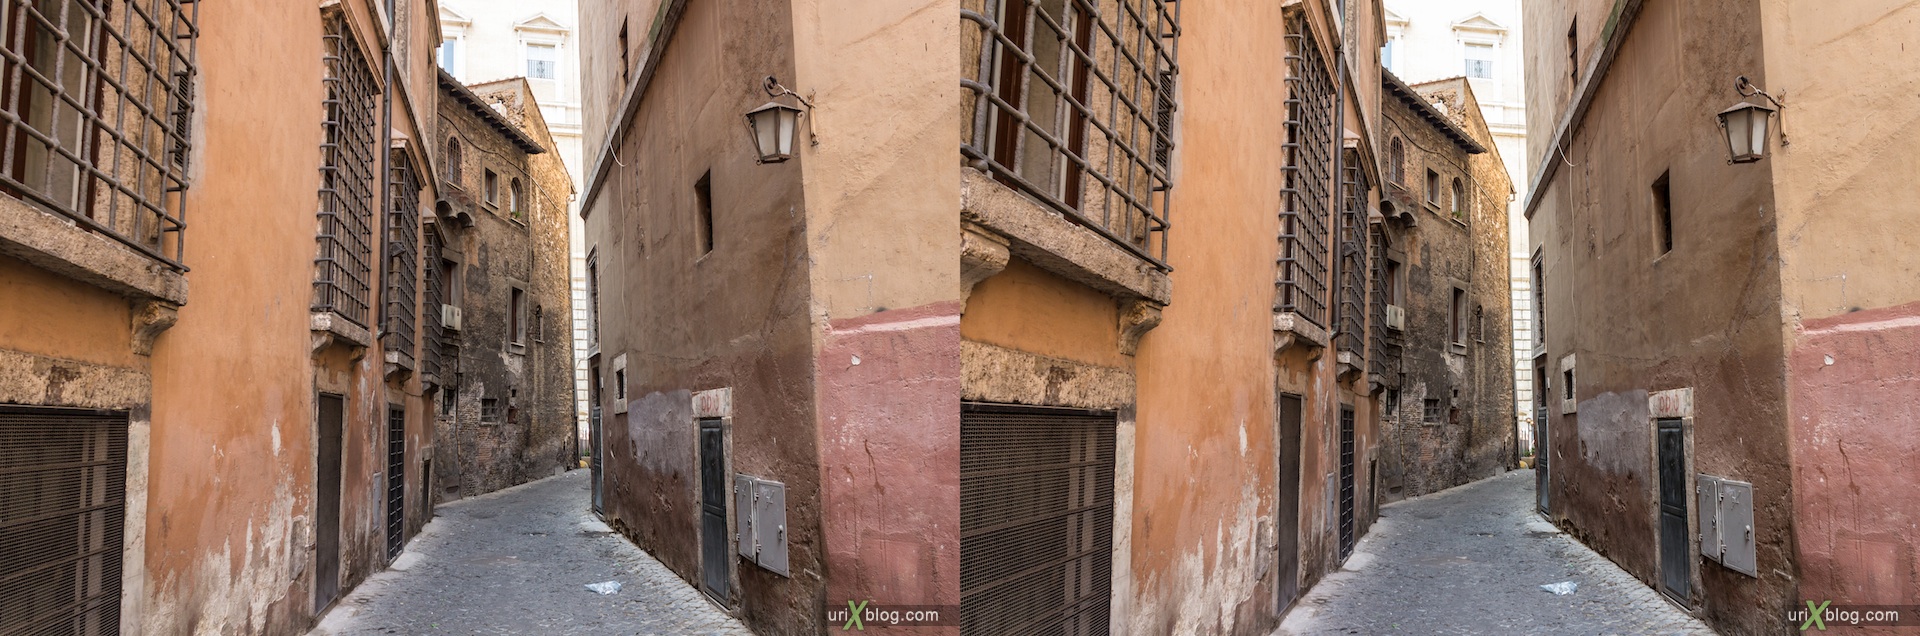 2012, vicolo della Cuccagna, Rome, Italy, 3D, stereo pair, cross-eyed, crossview, cross view stereo pair